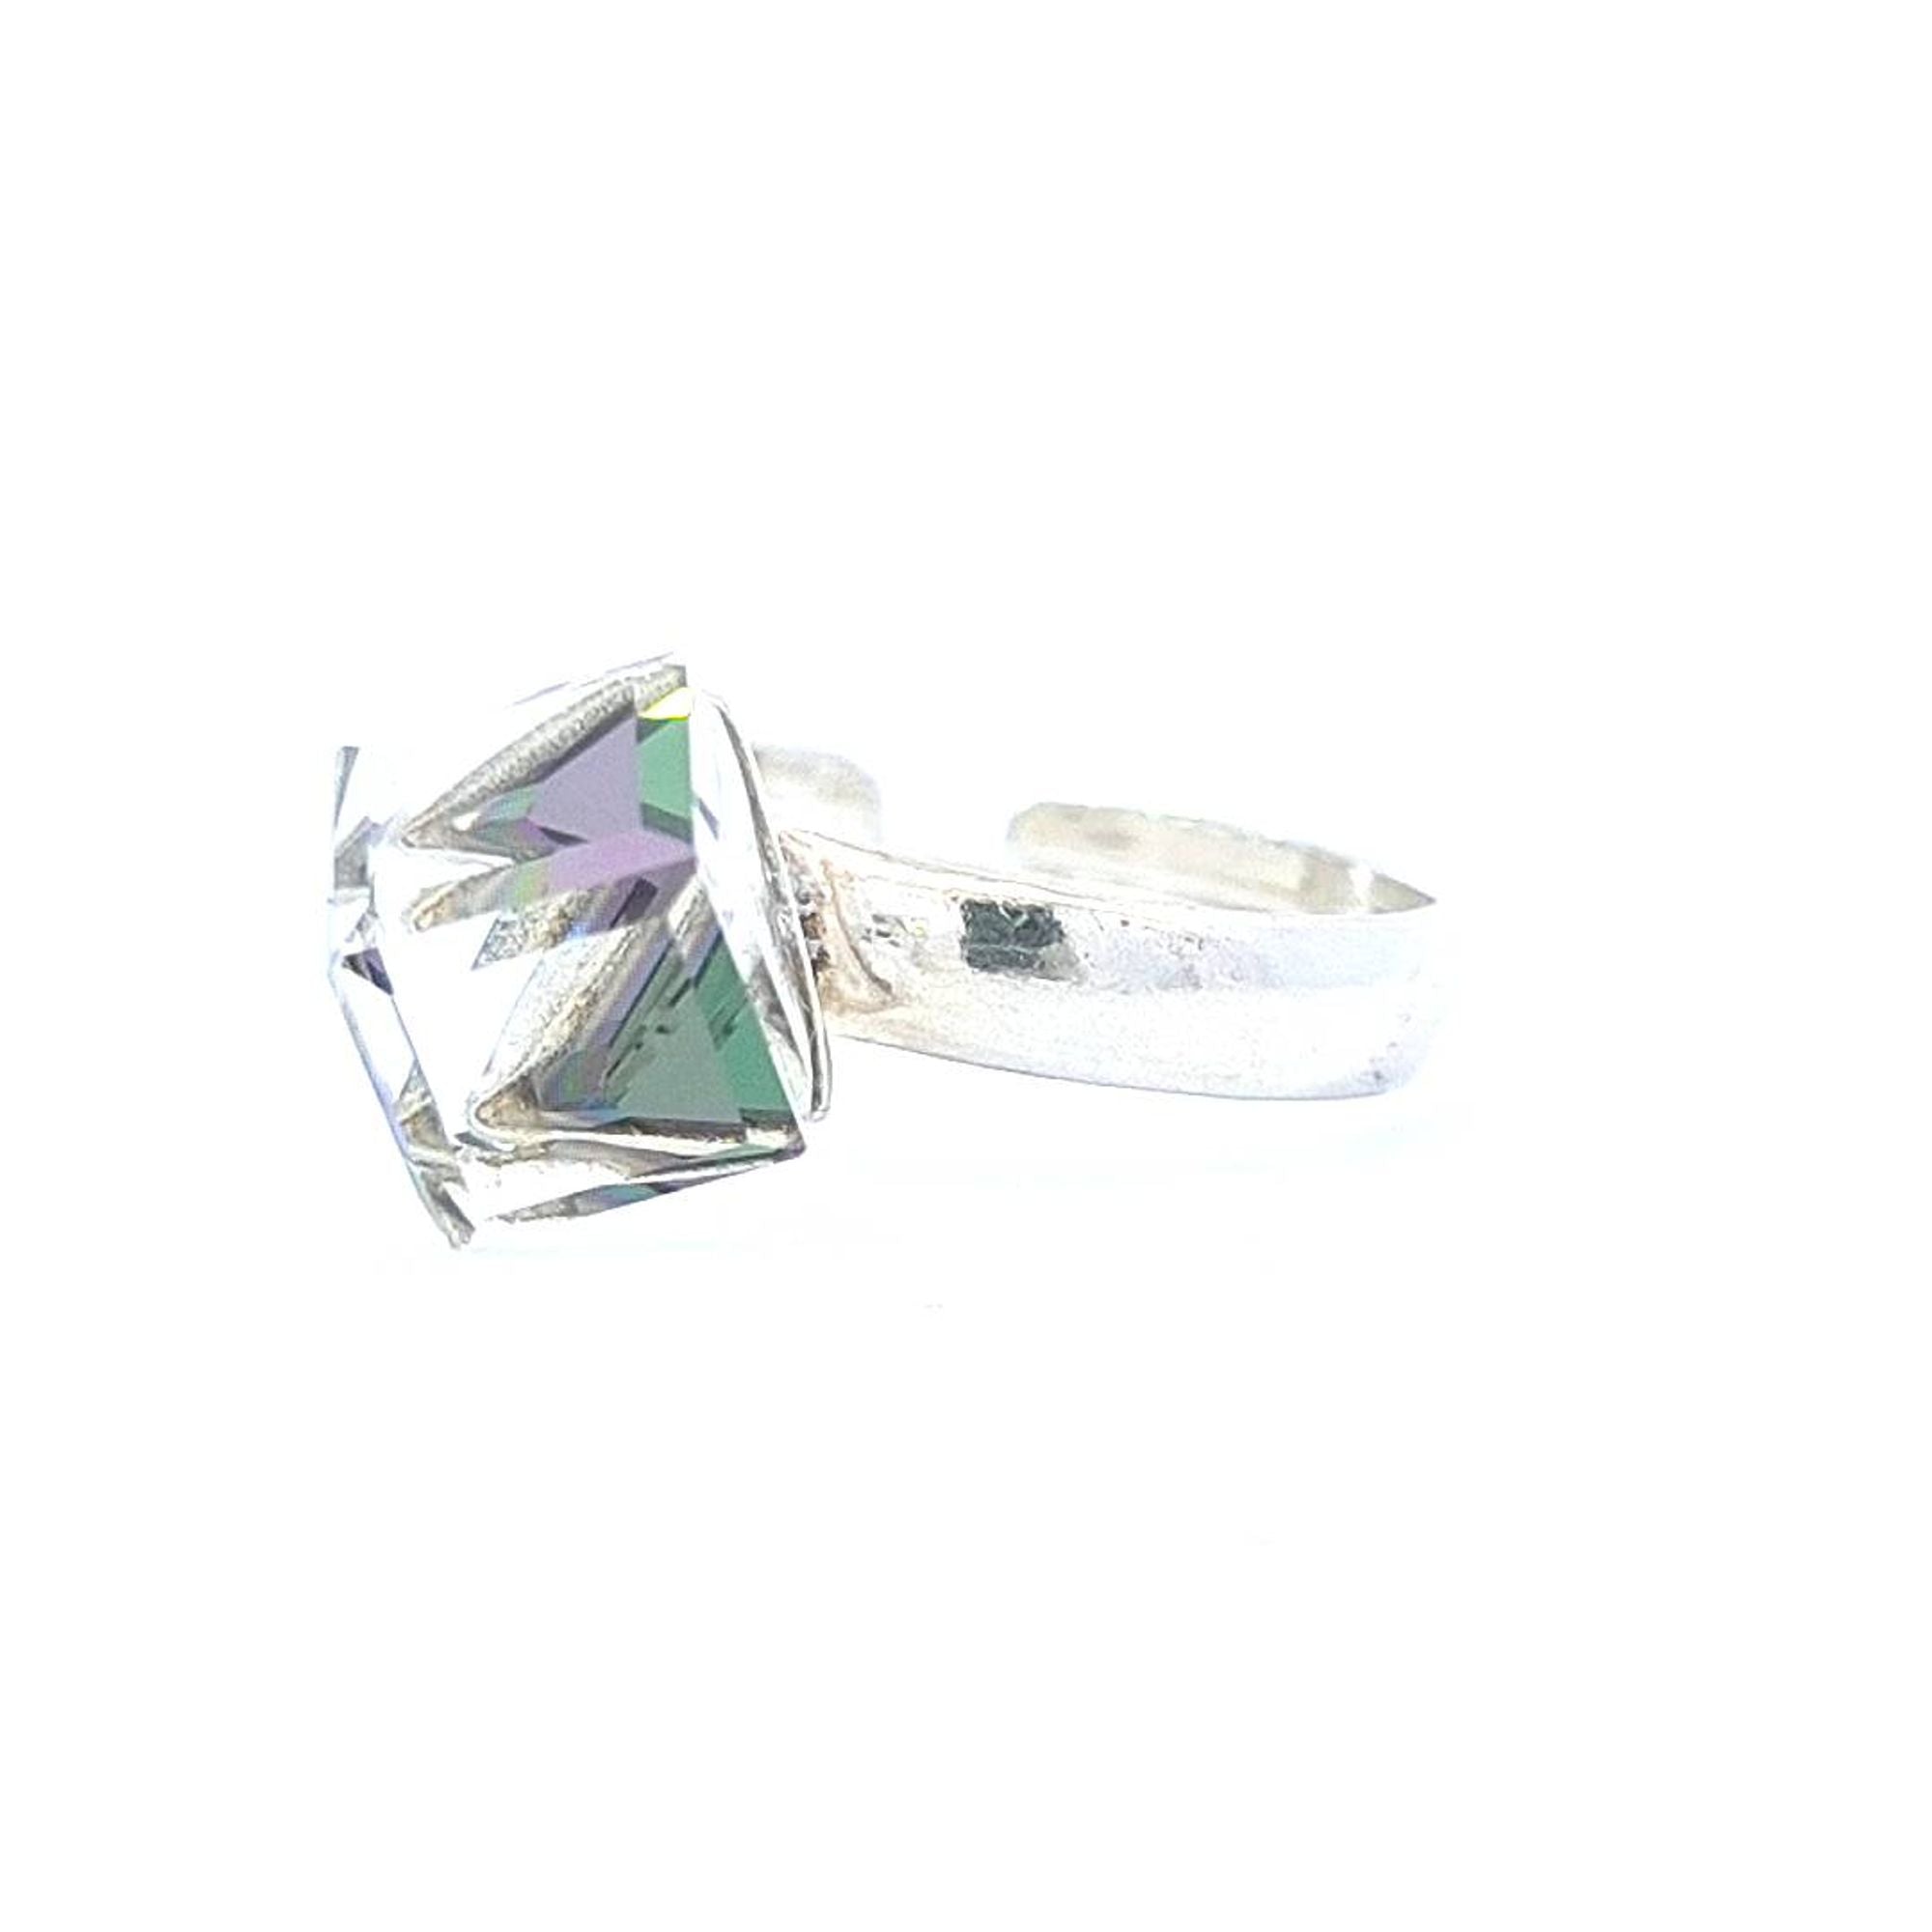 Magpie Gems' GeoGlimmer Cube Ring Featuring a Mystical Heliotrope Purple Crystal - side view